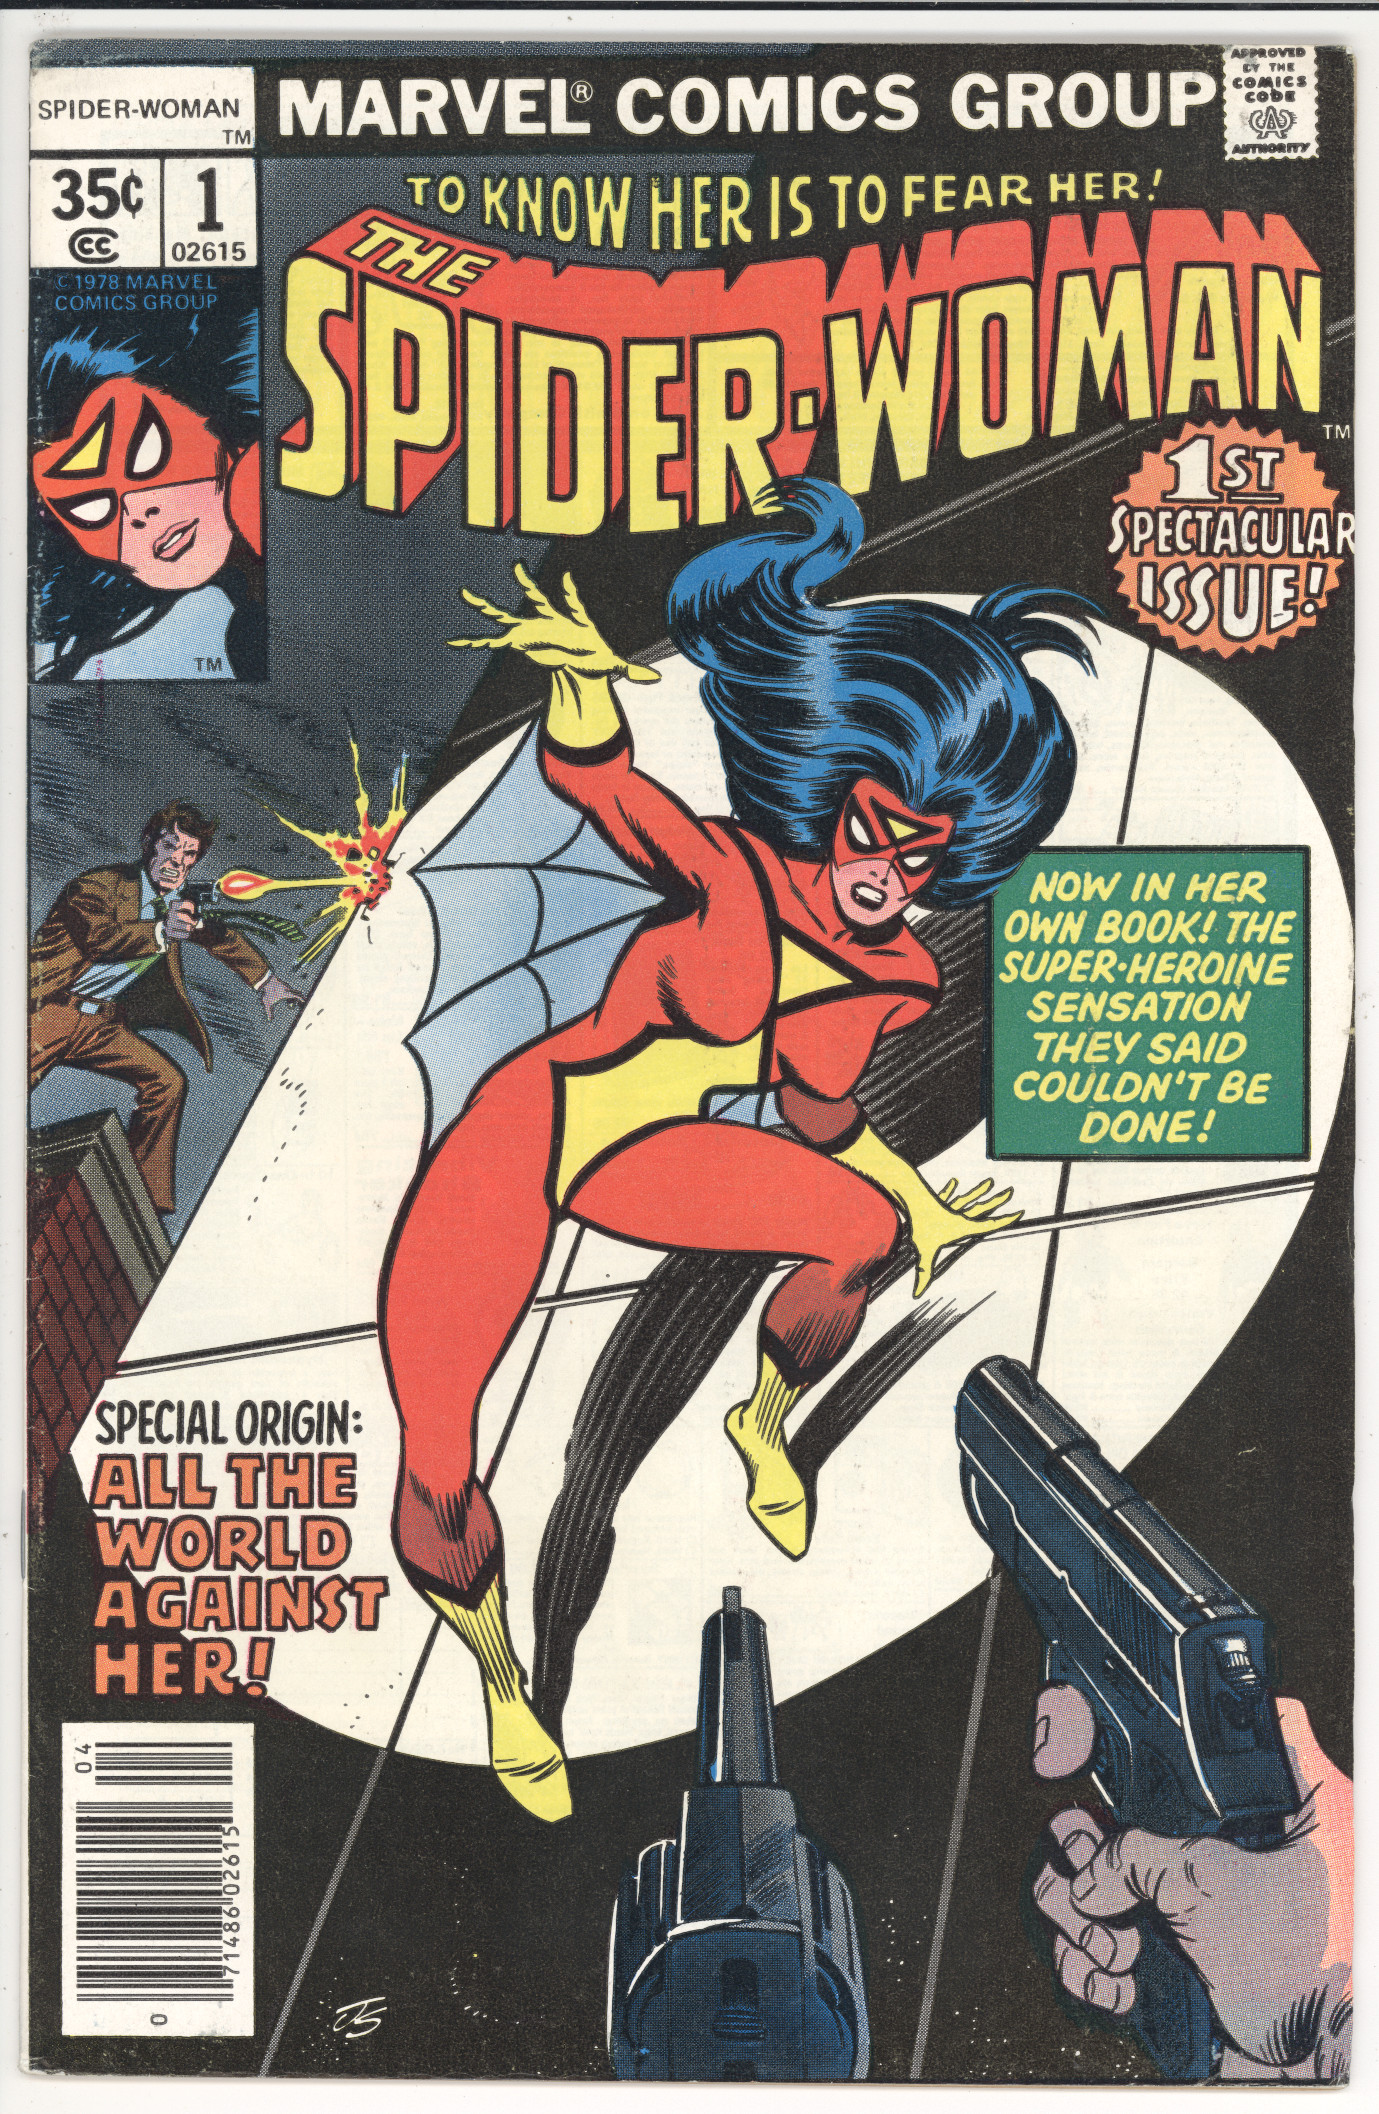 Spider-Woman #1 front